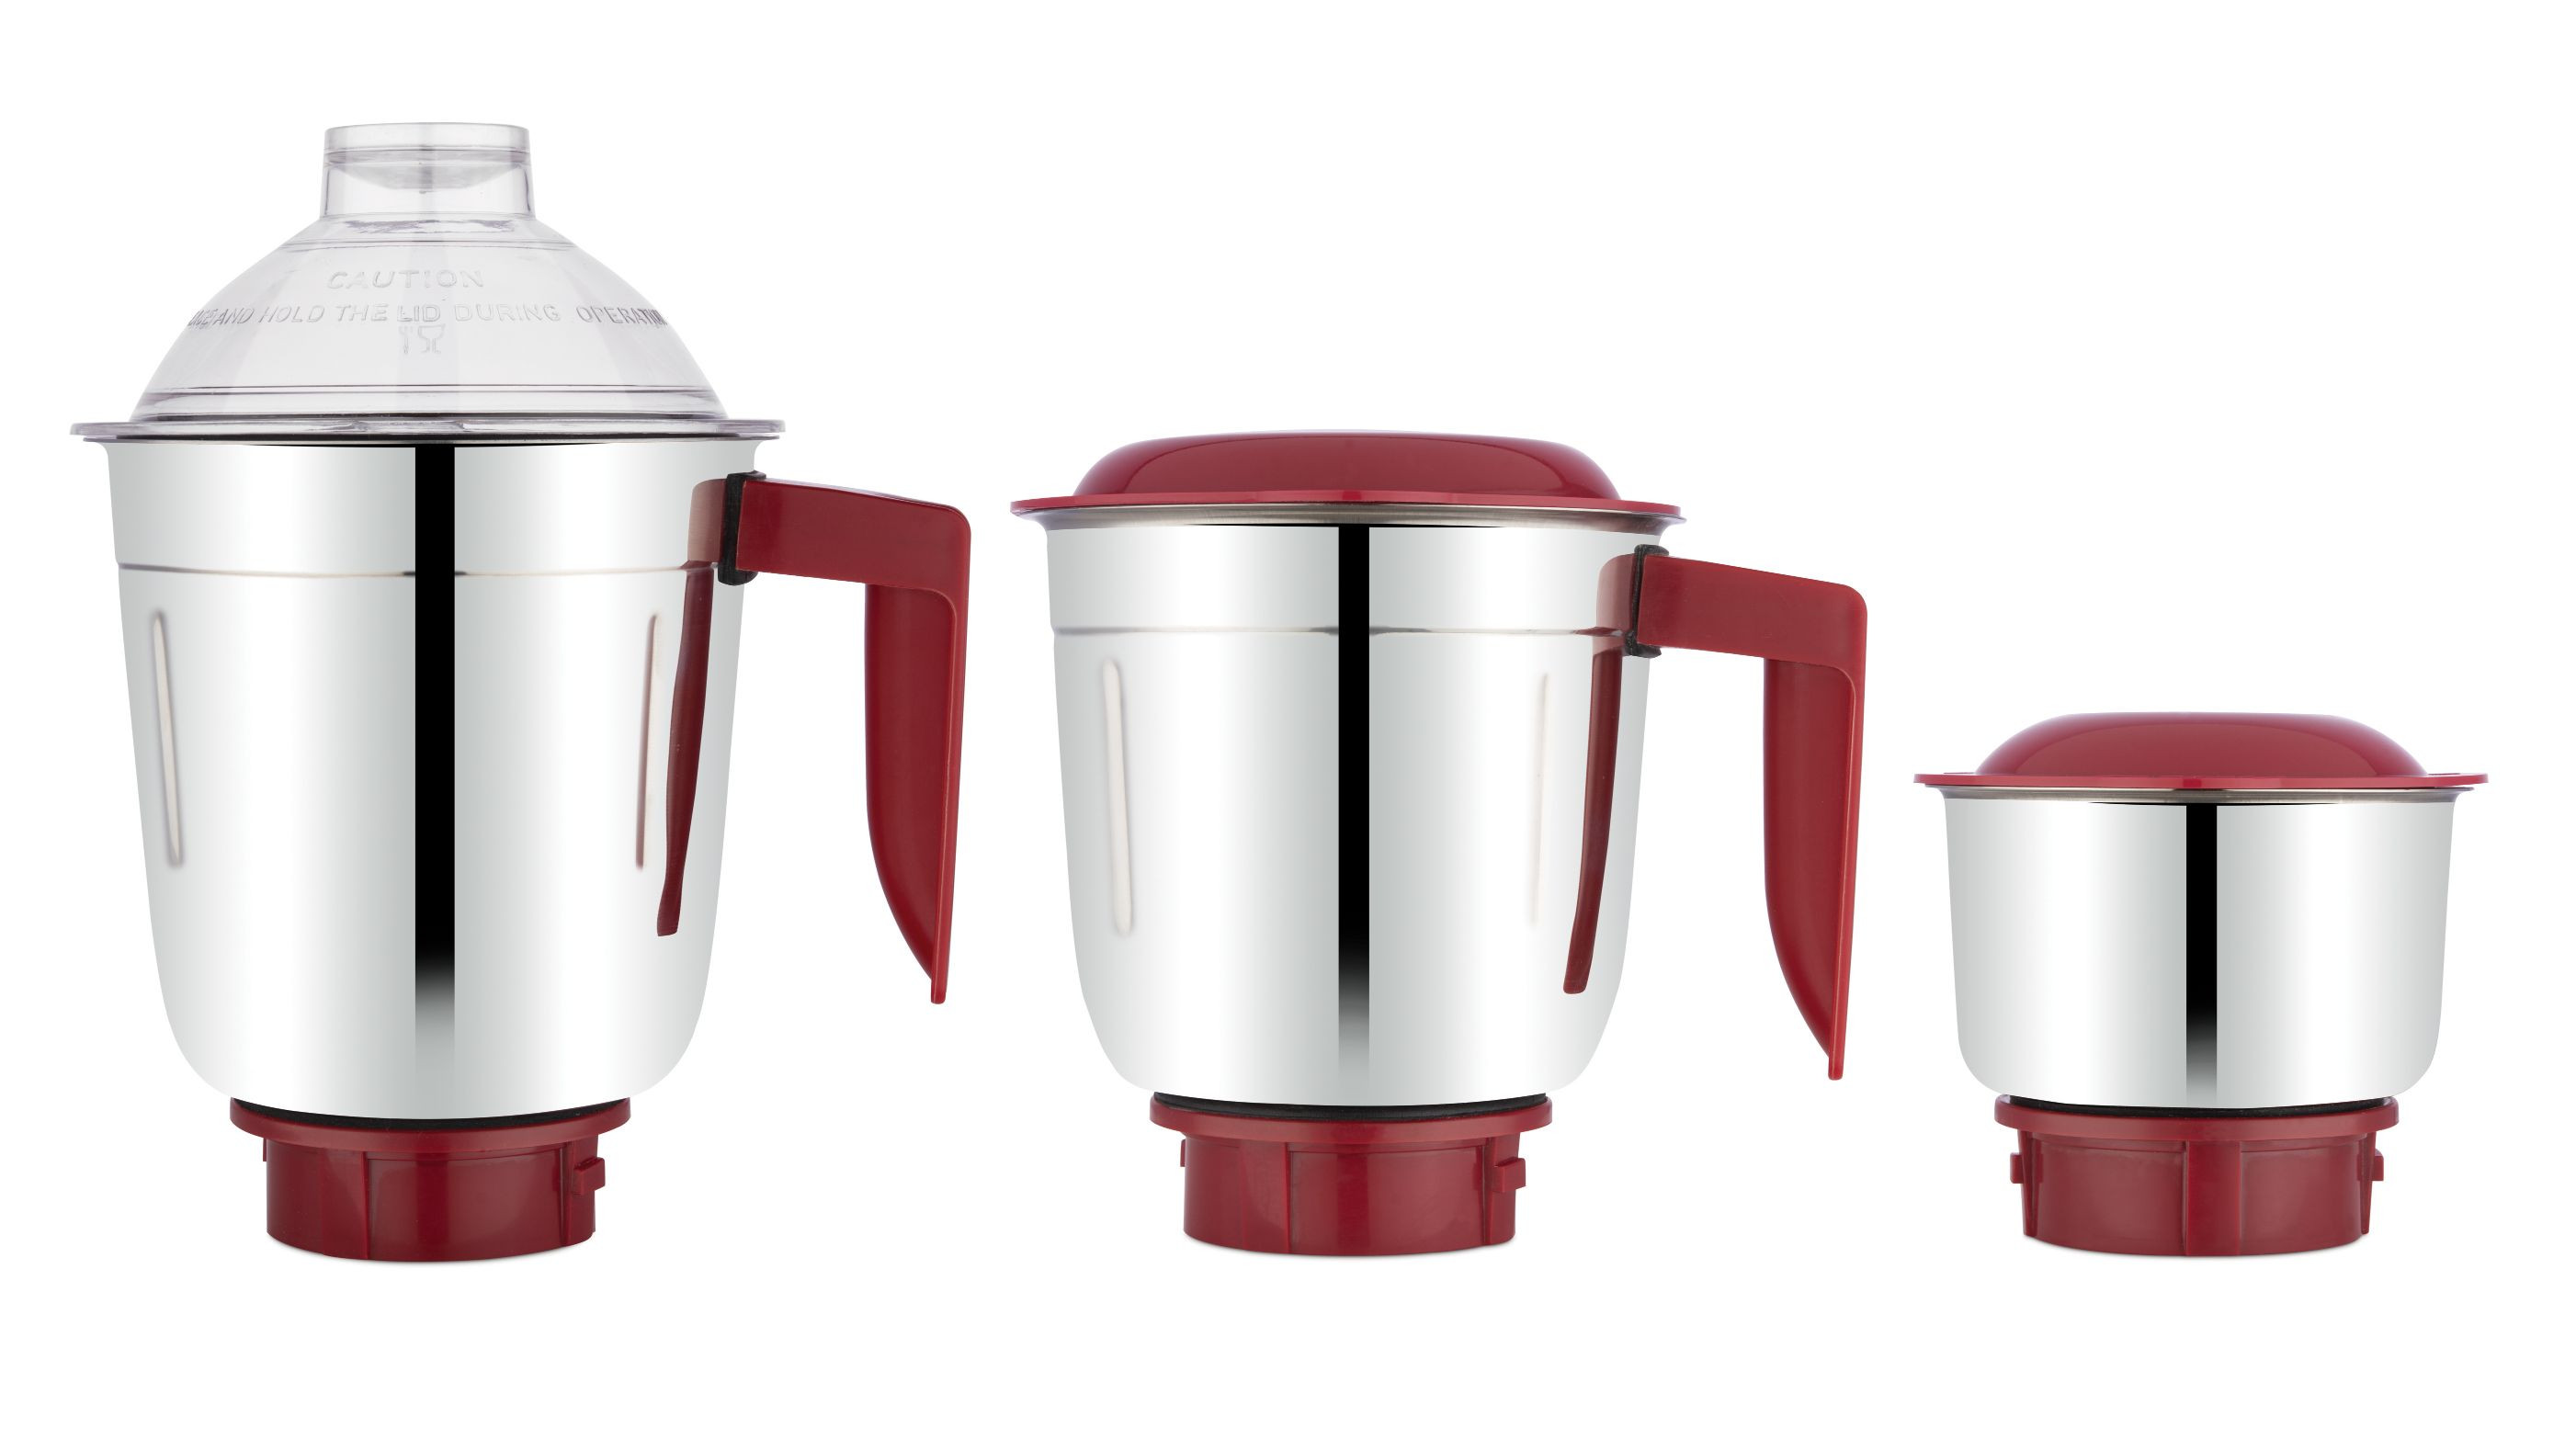 bajaj-classic-indian-mixer-grinder-600w-stainless-steel-jars-indian-mixer-grinder-spice-coffee-grinder-110v-for-use-in-canada-usa